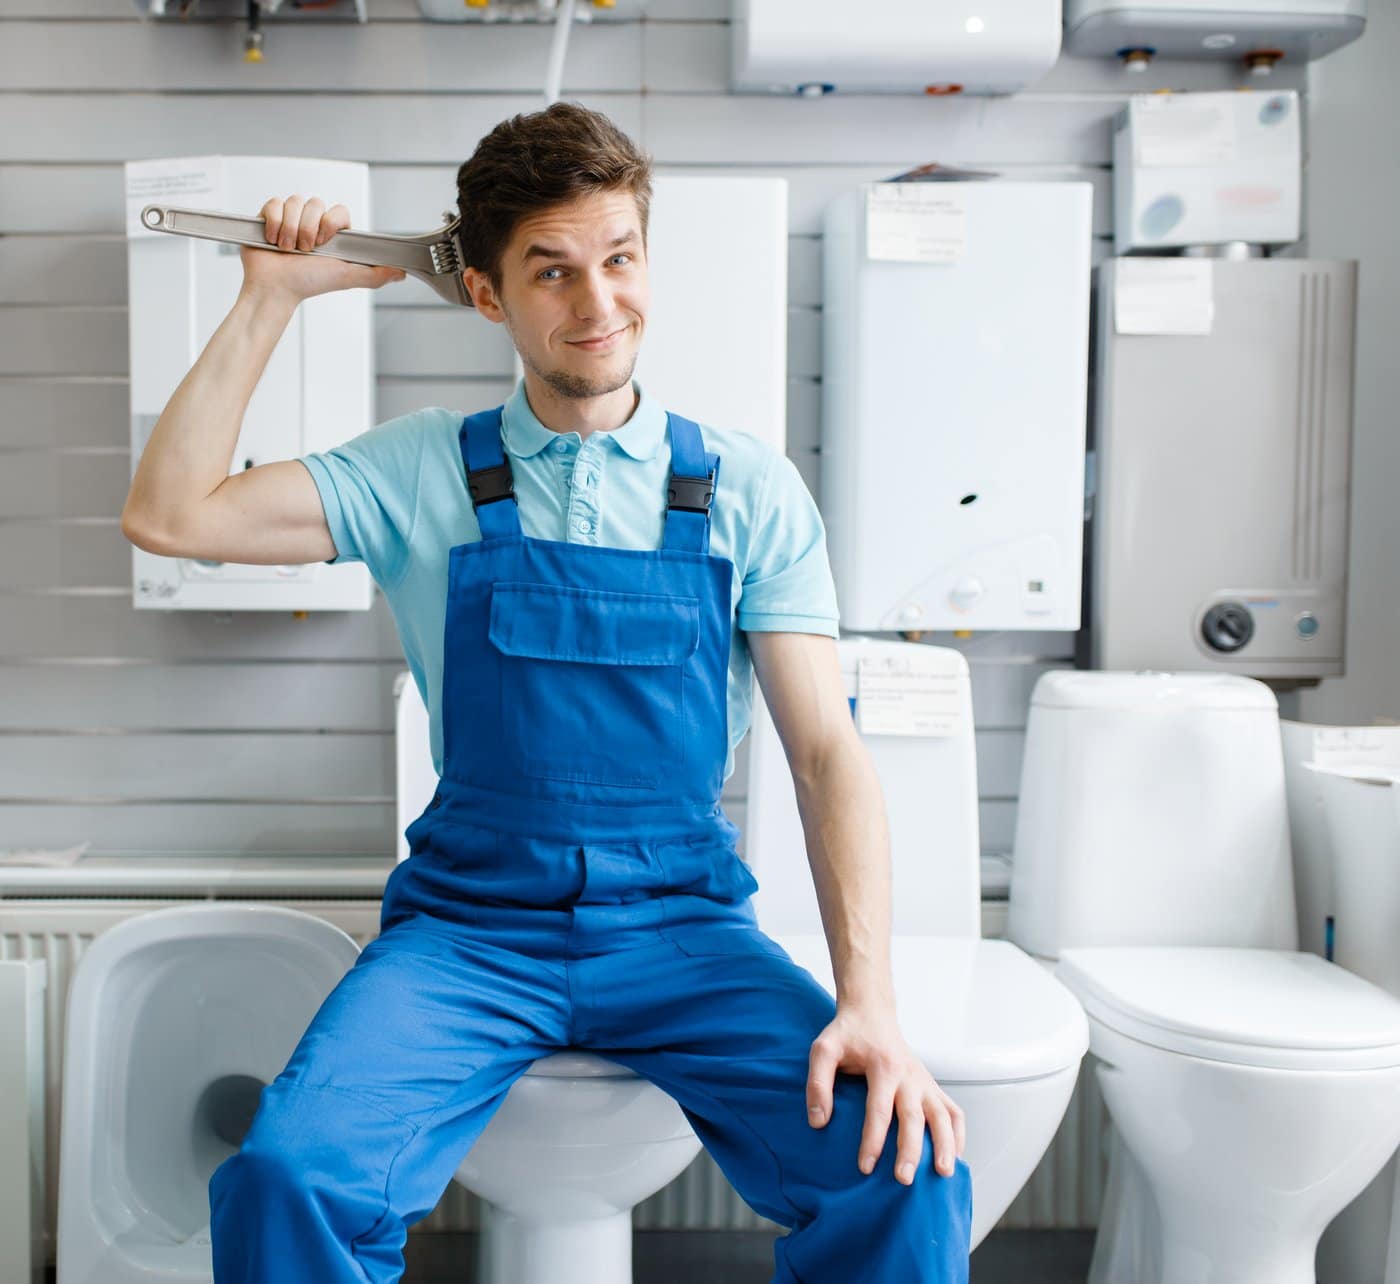 A plumber in overalls with a wrench, sitting on a toilet